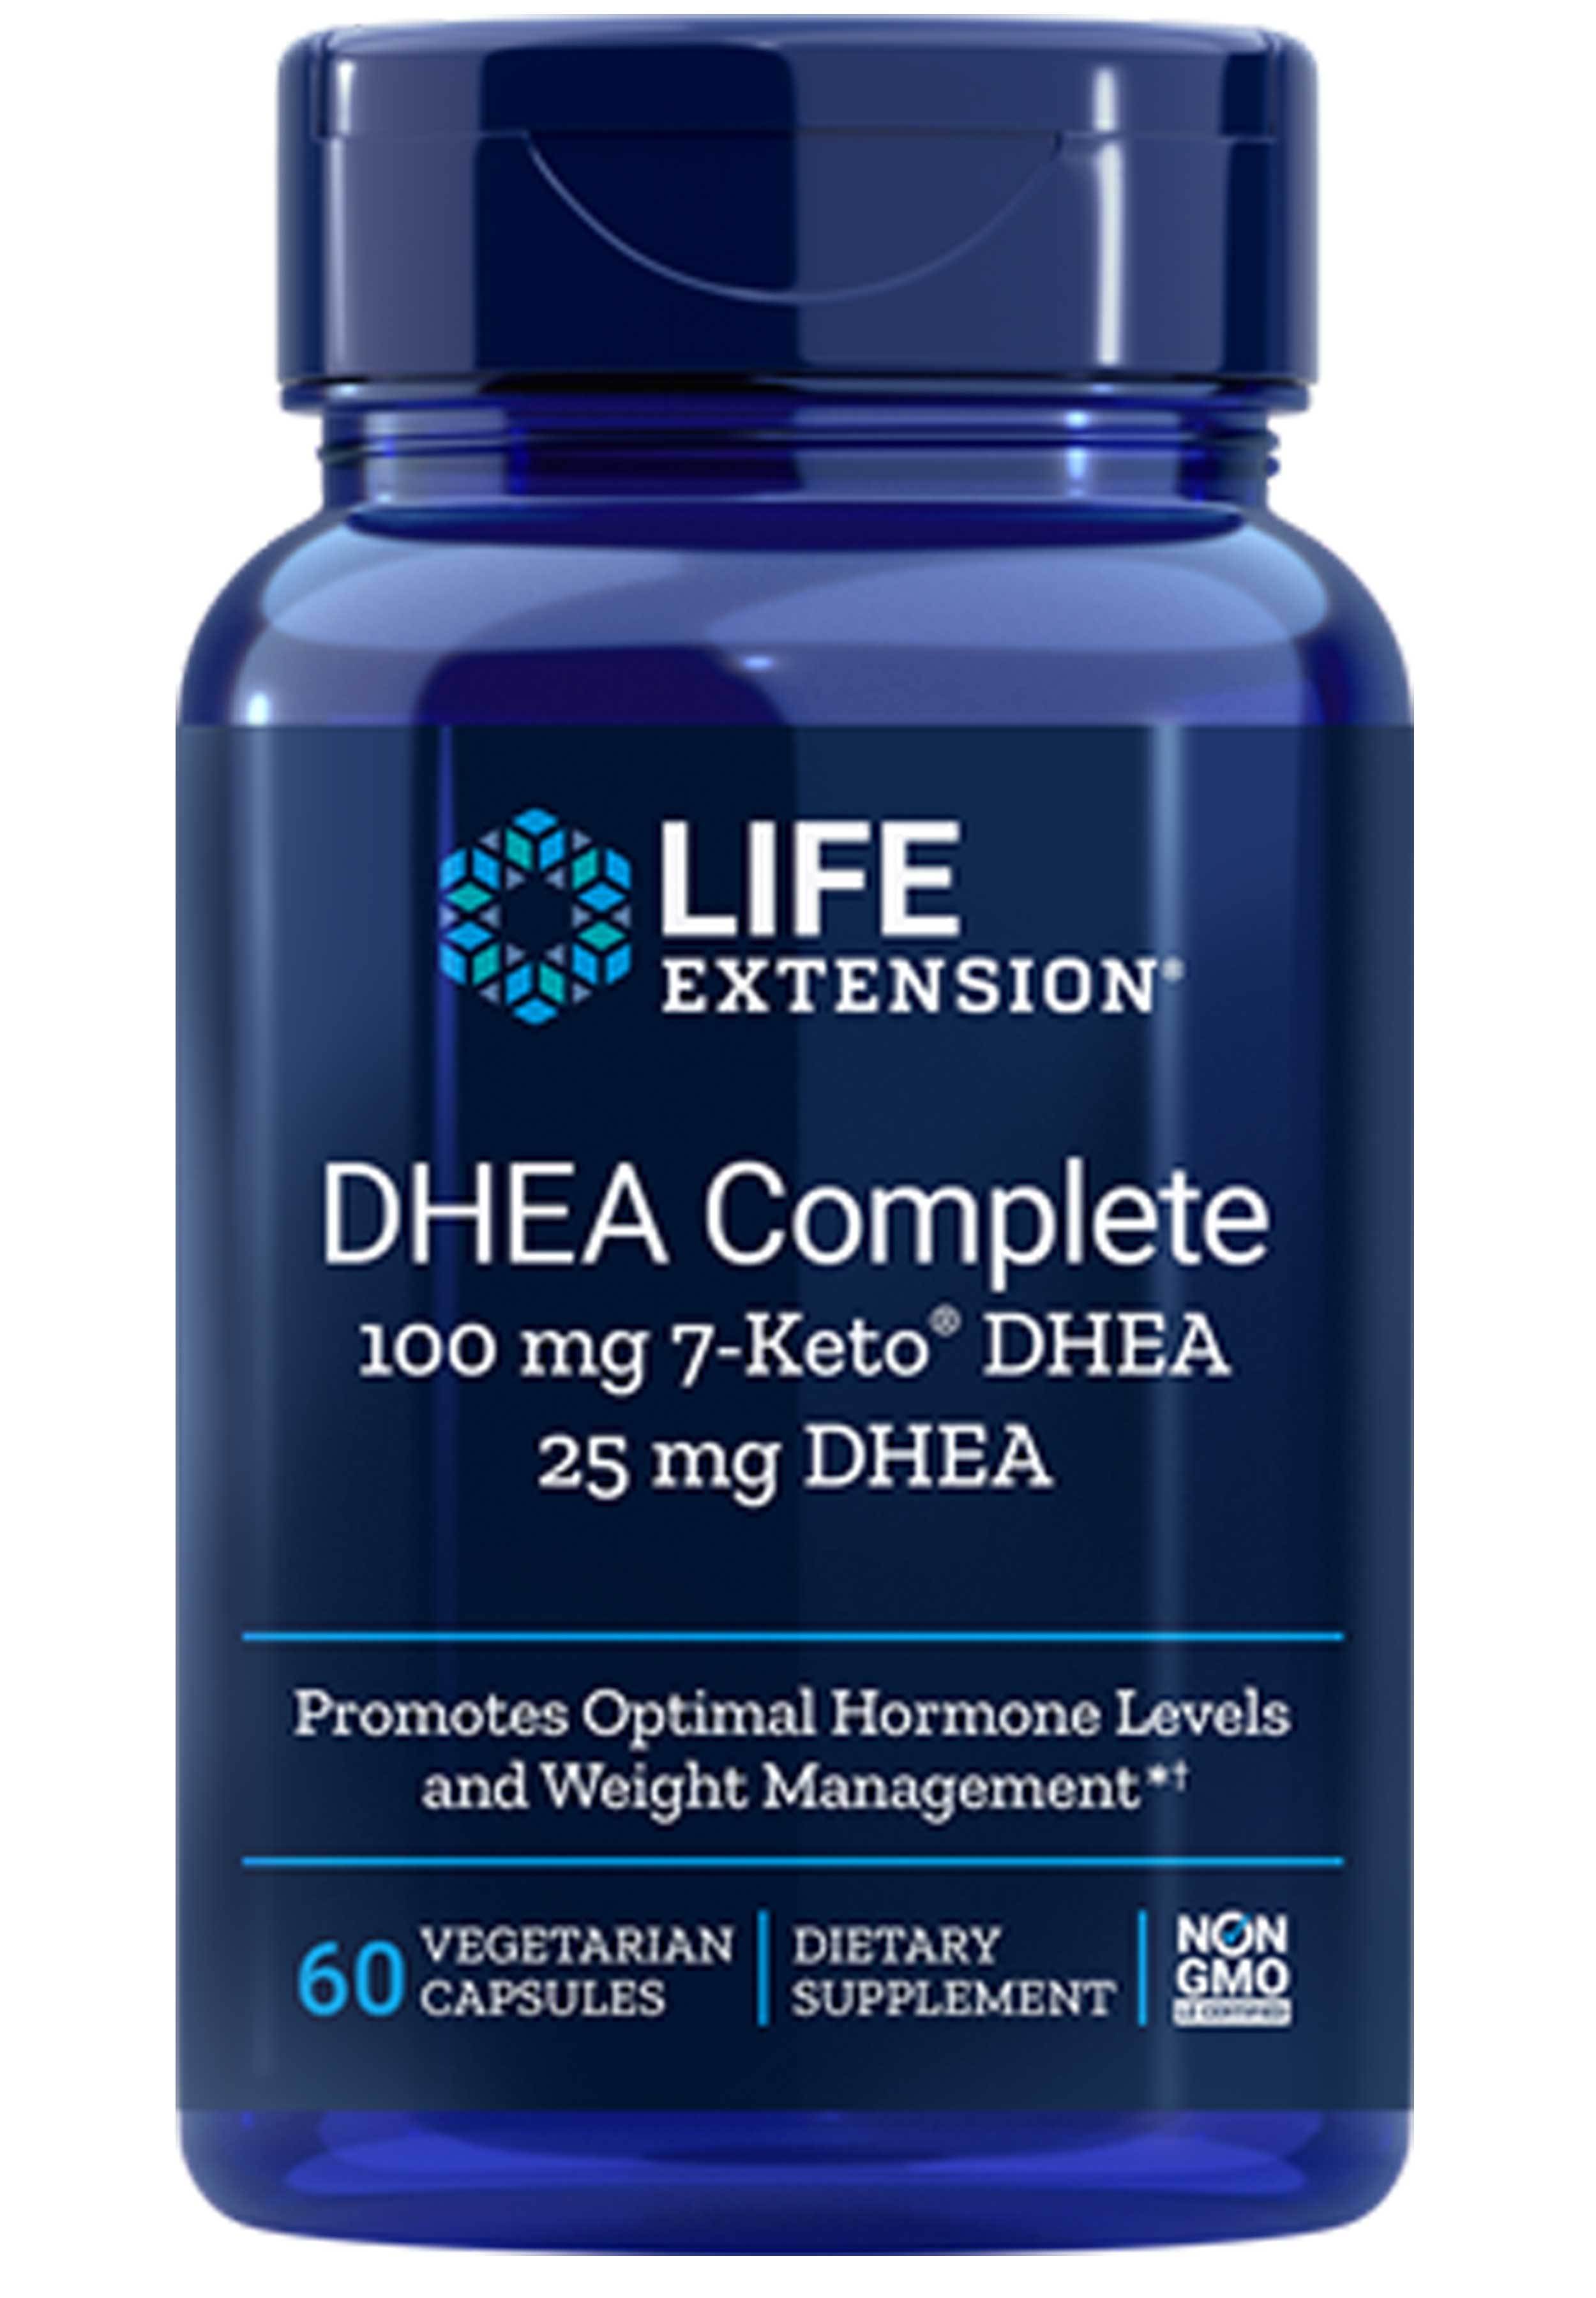 Life Extension DHEA Complete